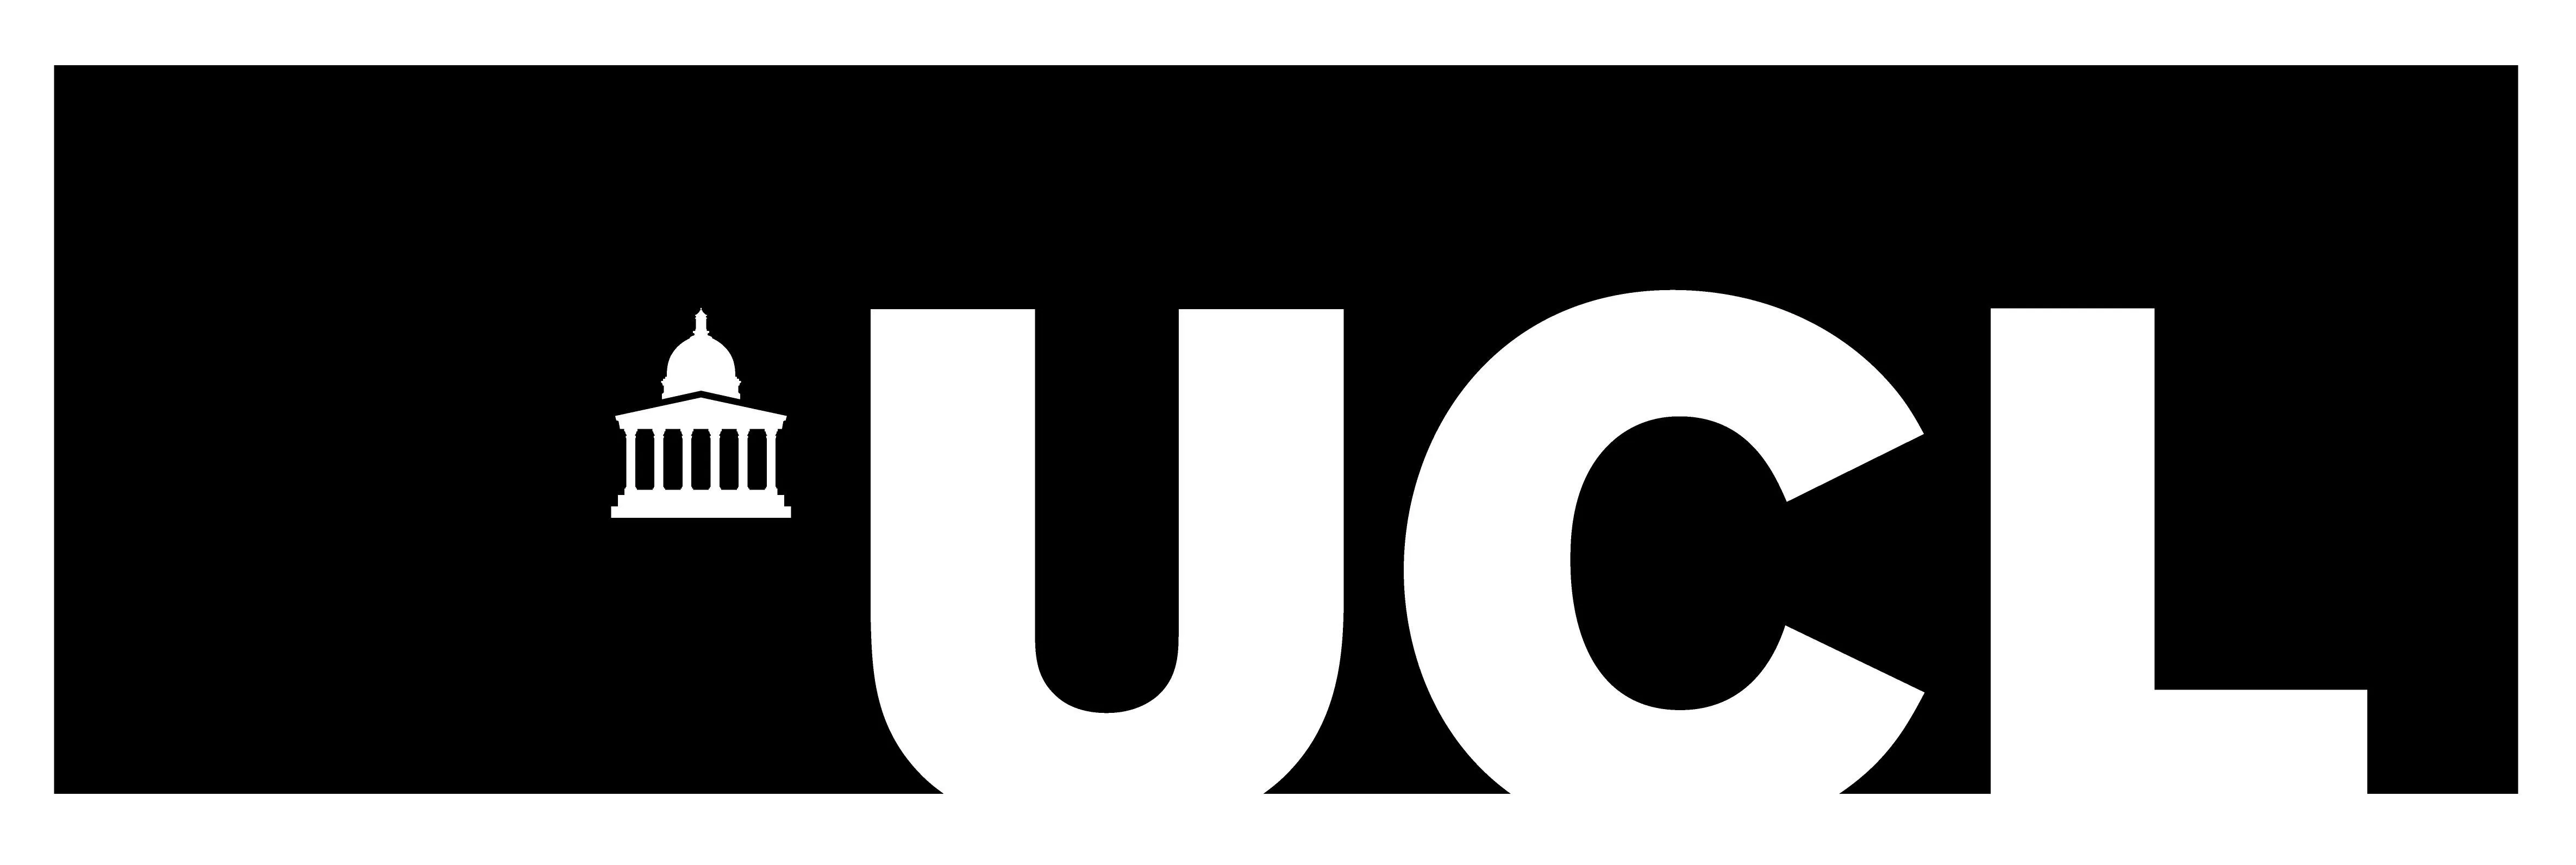 UCL logo in black and white